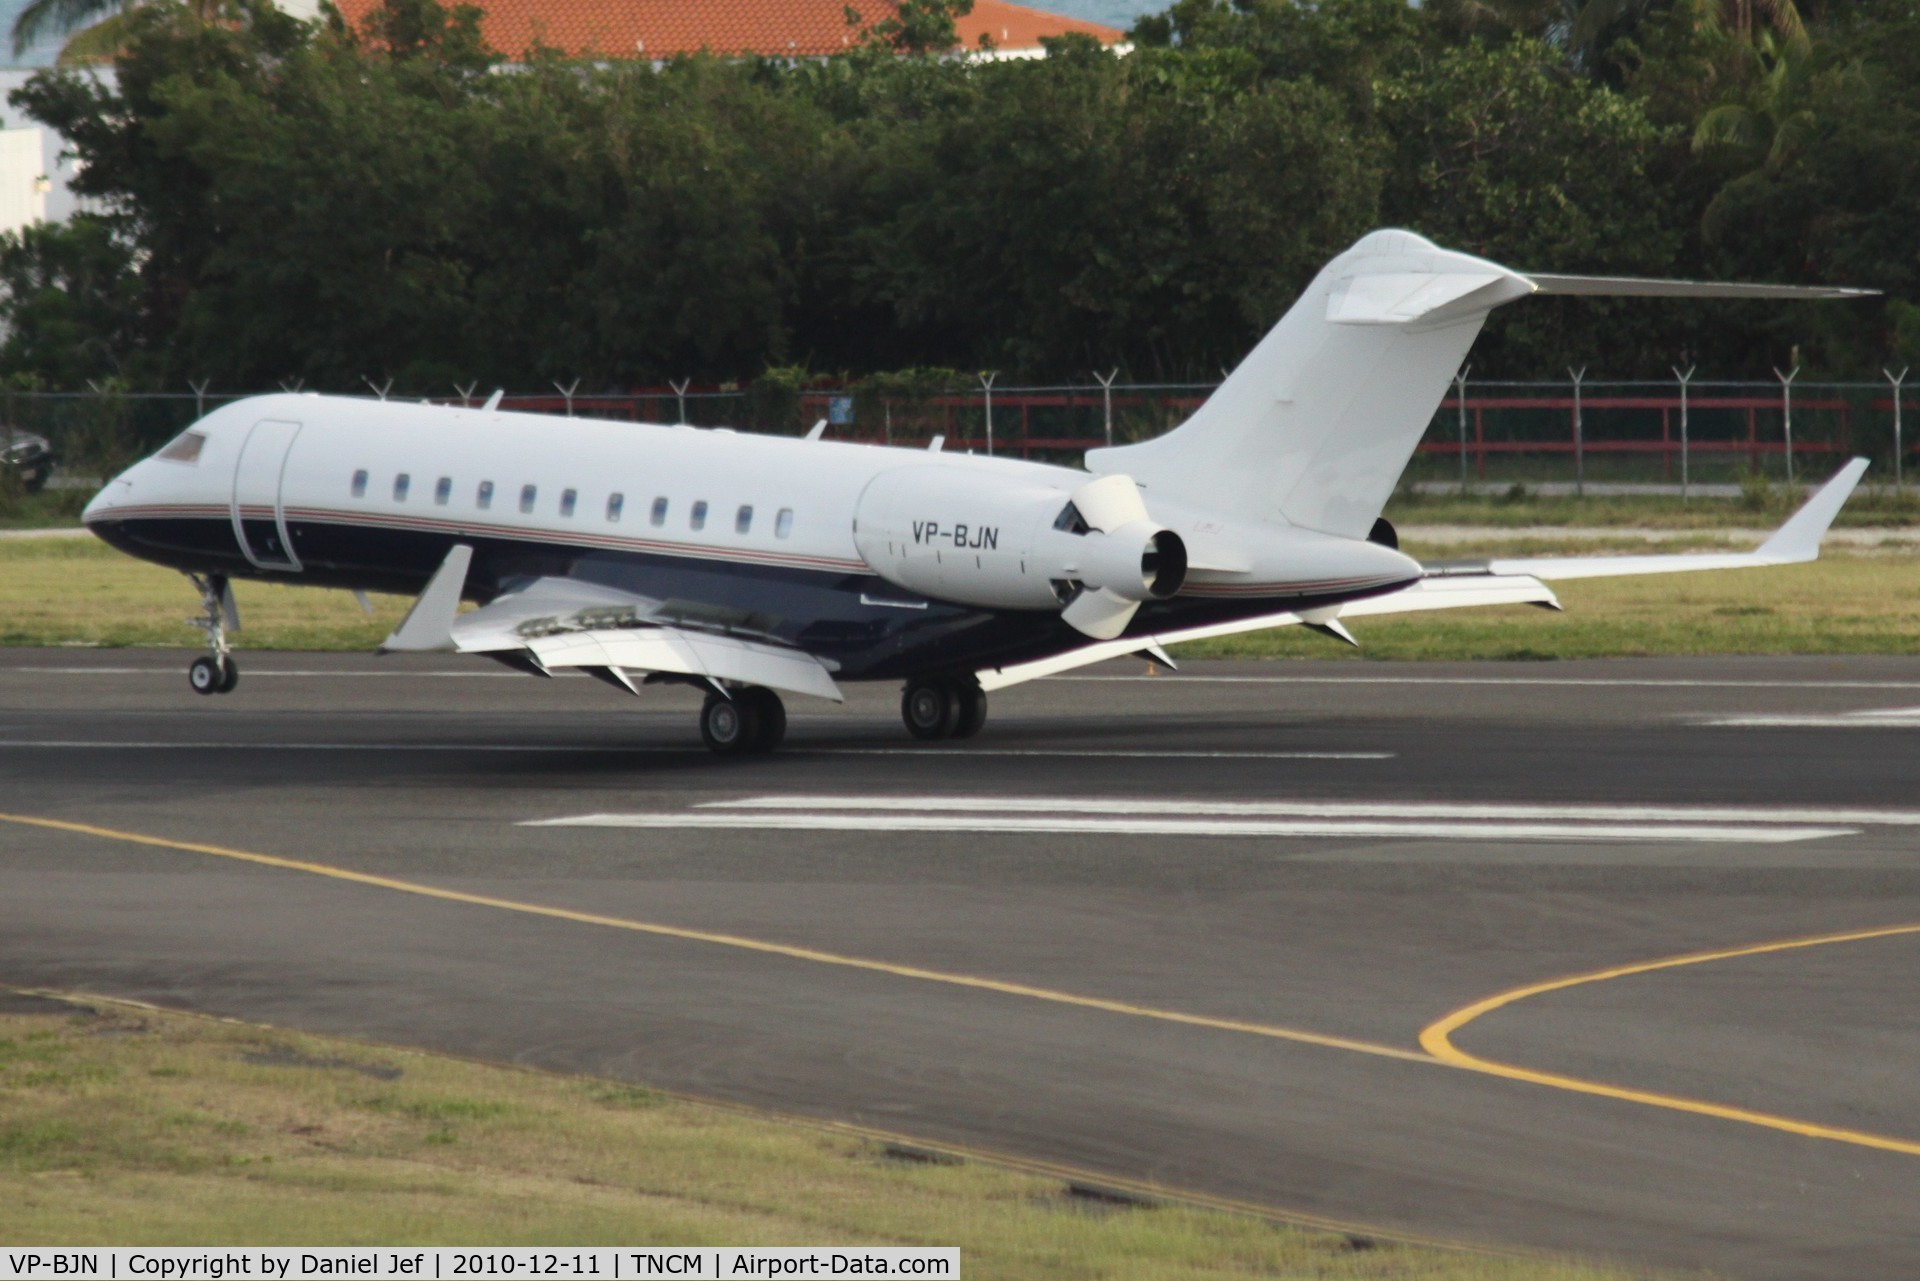 VP-BJN, 2007 Bombardier BD-700-1A11 Global 5000 C/N 9273, VP-BJN making use of there use of all there stoping powers at TNCM runway 10